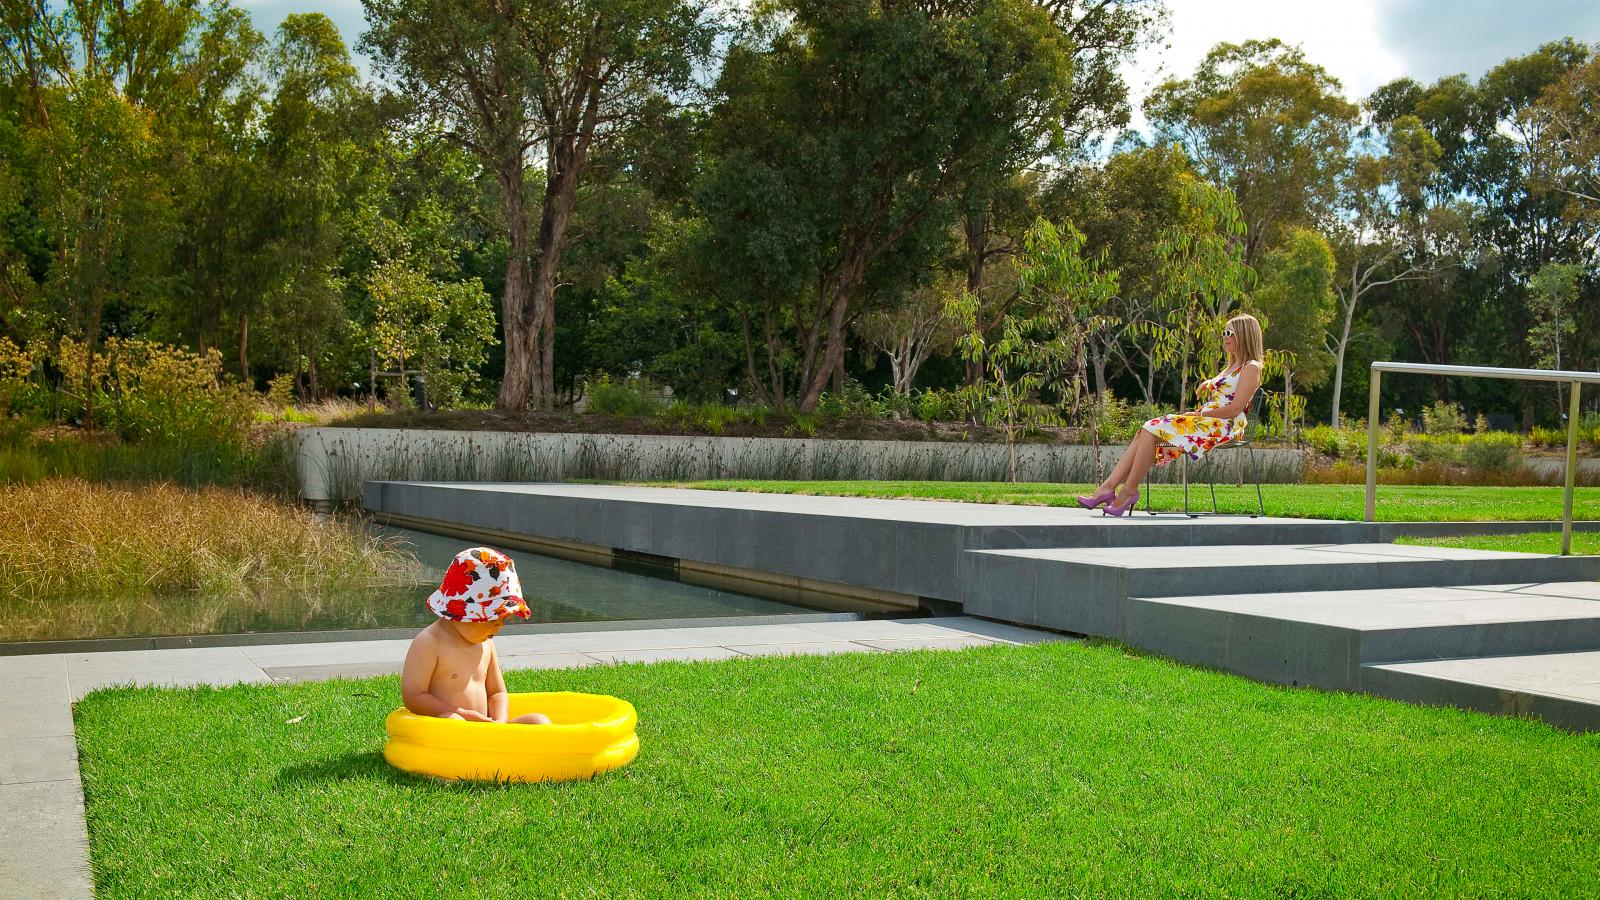 A child wearing a floral hat sits in a small yellow inflatable pool on a grassy area within the Australian Garden near a water feature. A woman in a floral dress sits on a chair on a concrete platform overlooking the scene, with trees and greenery in the background, reminiscent of an NGA exhibit.